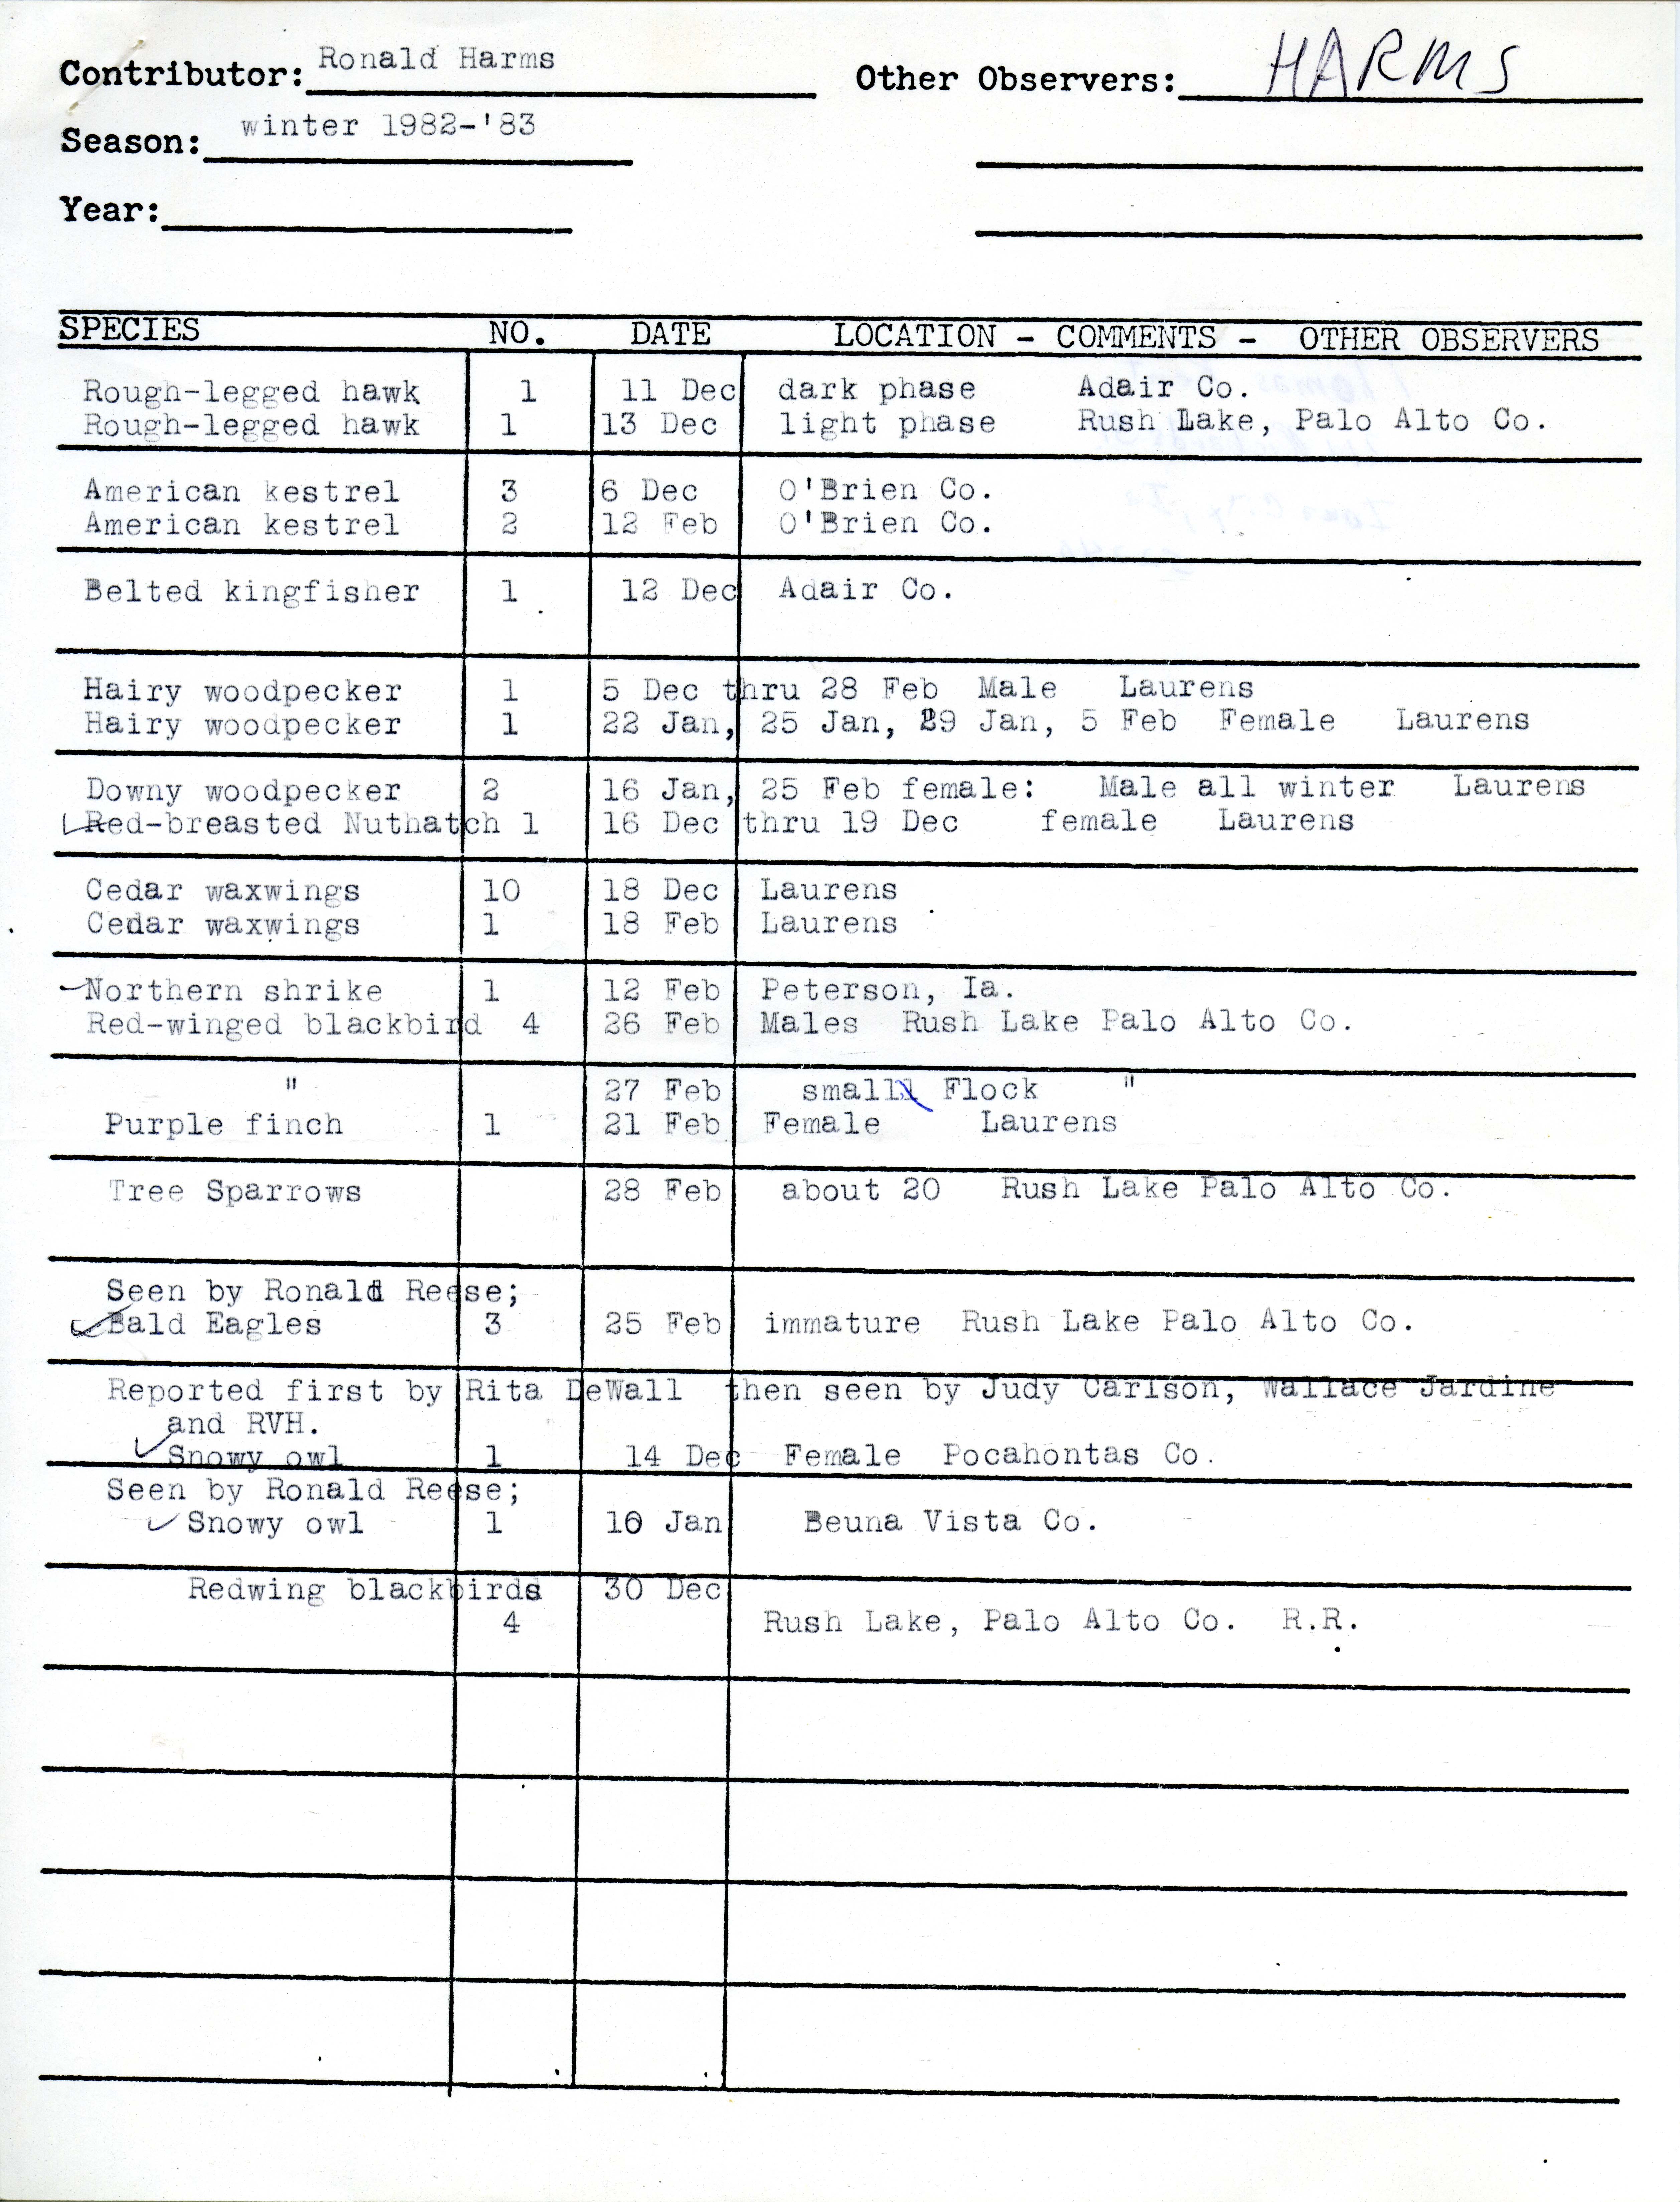 Field notes contributed by Ronald Harms, winter 1982-1983